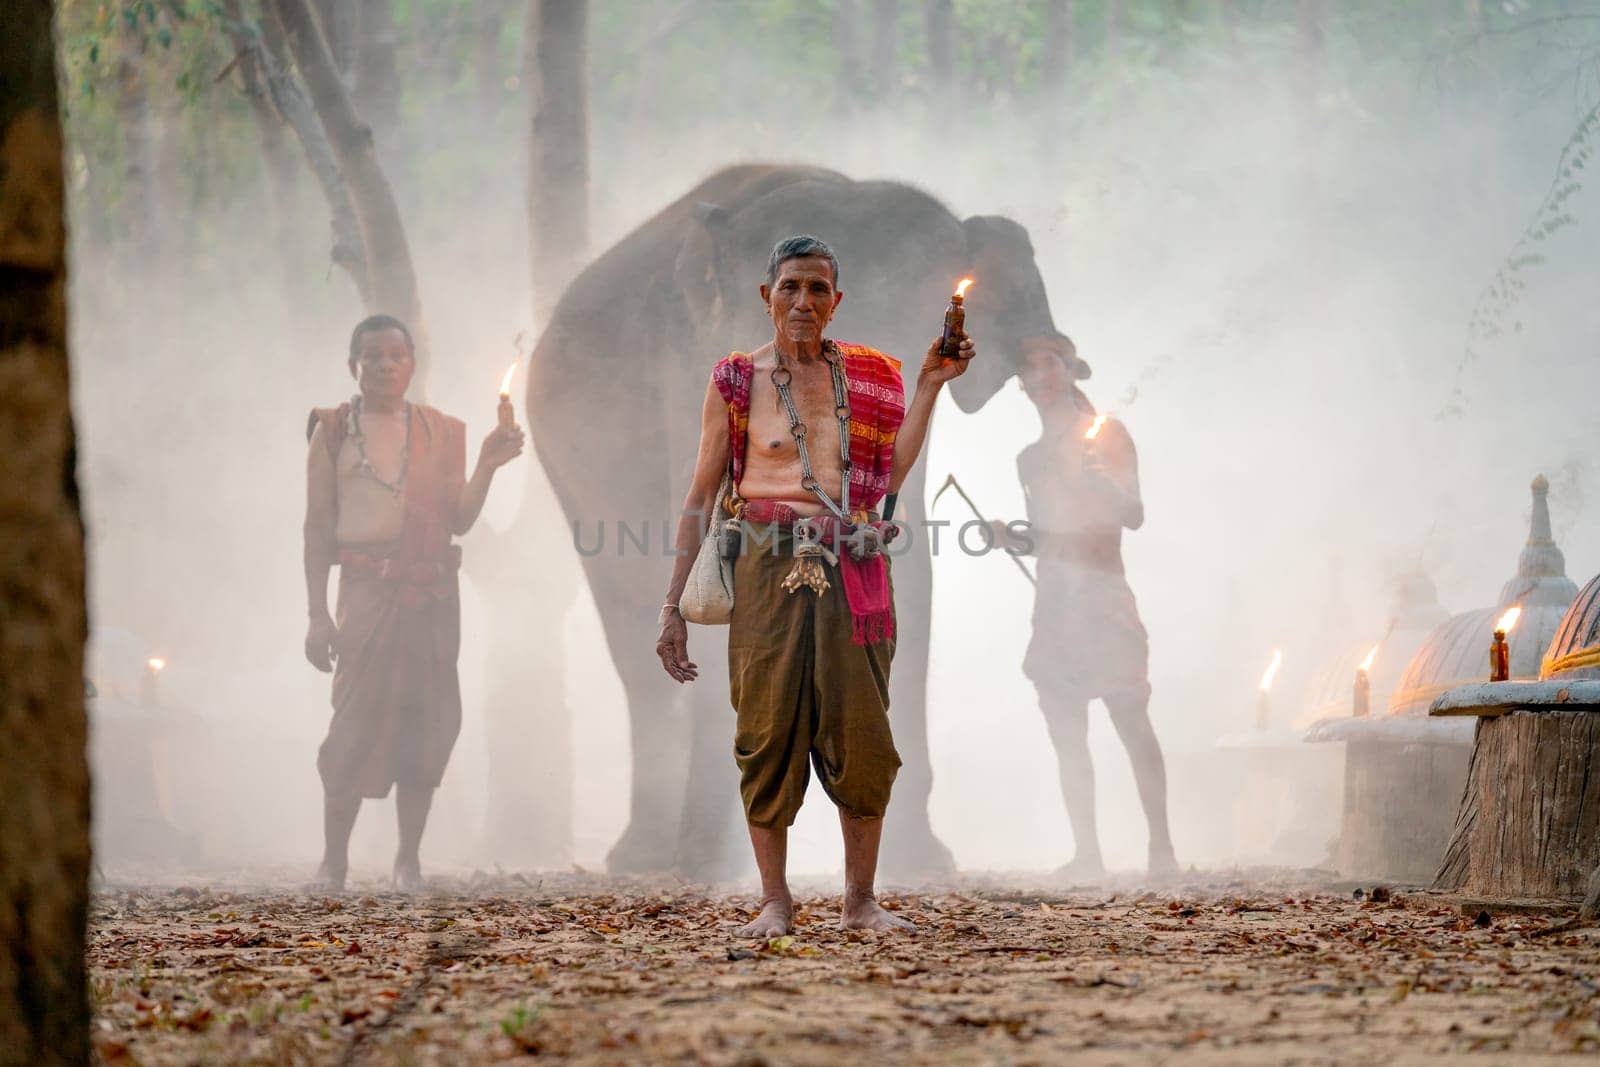 Mahout teacher hold torch and stand in front of other mahout and elephant in concept of traditional ceremony. by nrradmin